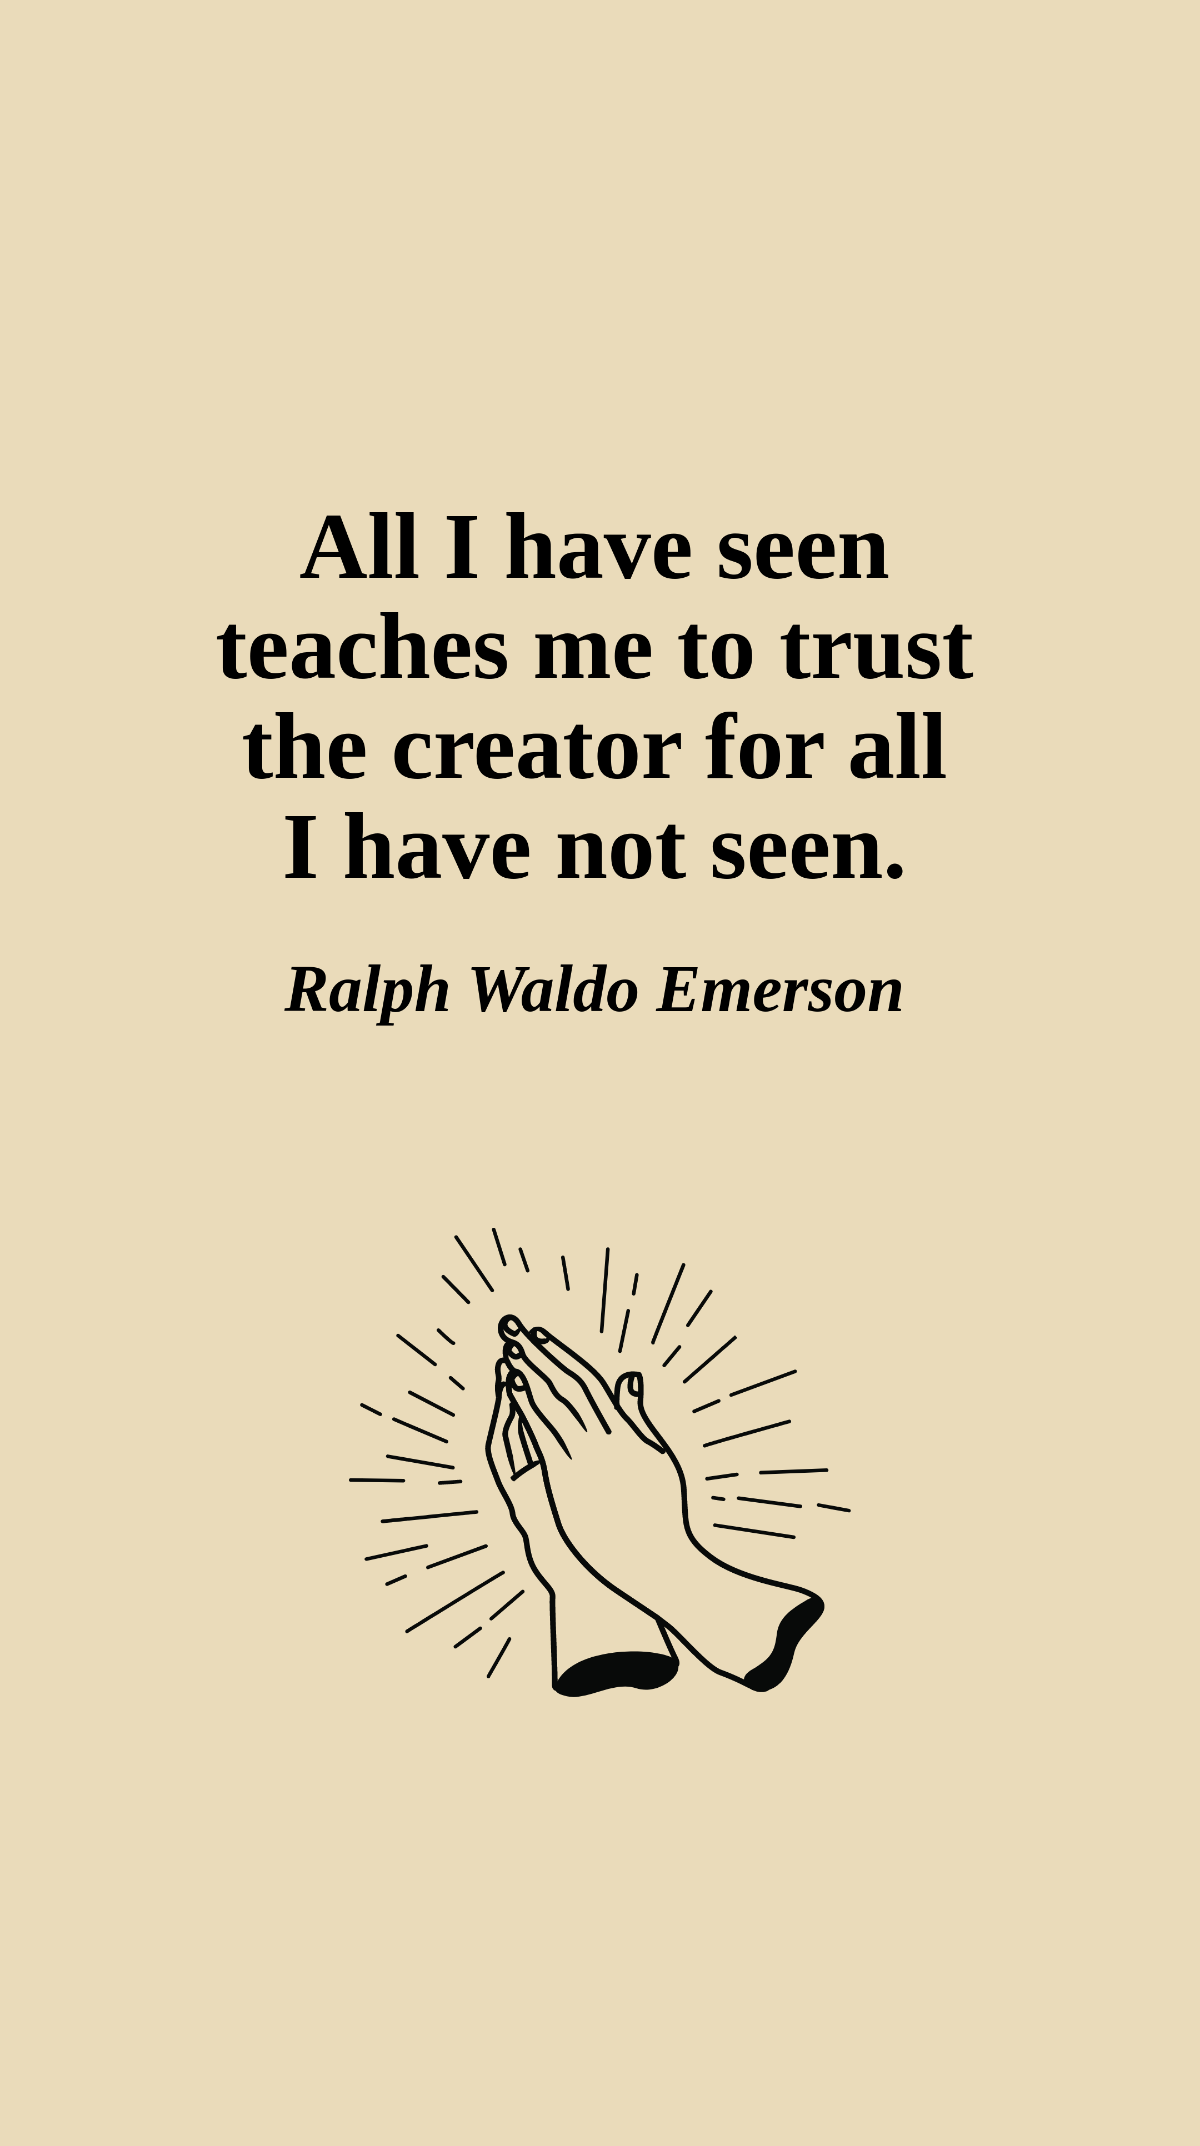 Free Ralph Waldo Emerson - All I have seen teaches me to trust the creator for all I have not seen. Template